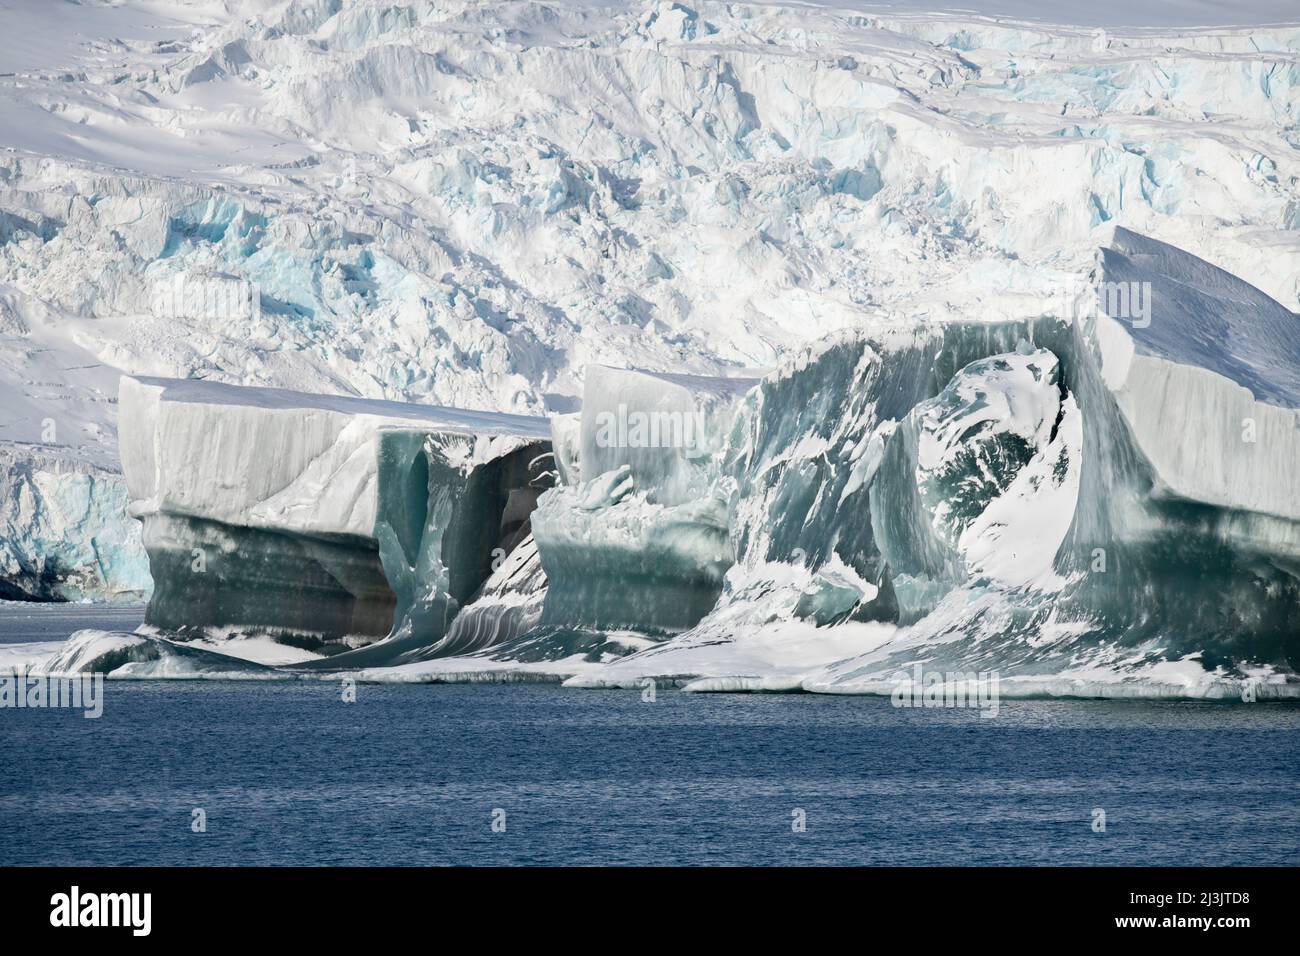 Antarctica, Southern Ocean, South Orkney Islands, Coronation Island, Iceberg Bay. Rare large 'jade ice' iceberg with Sunshine Glacier in the distance. Stock Photo